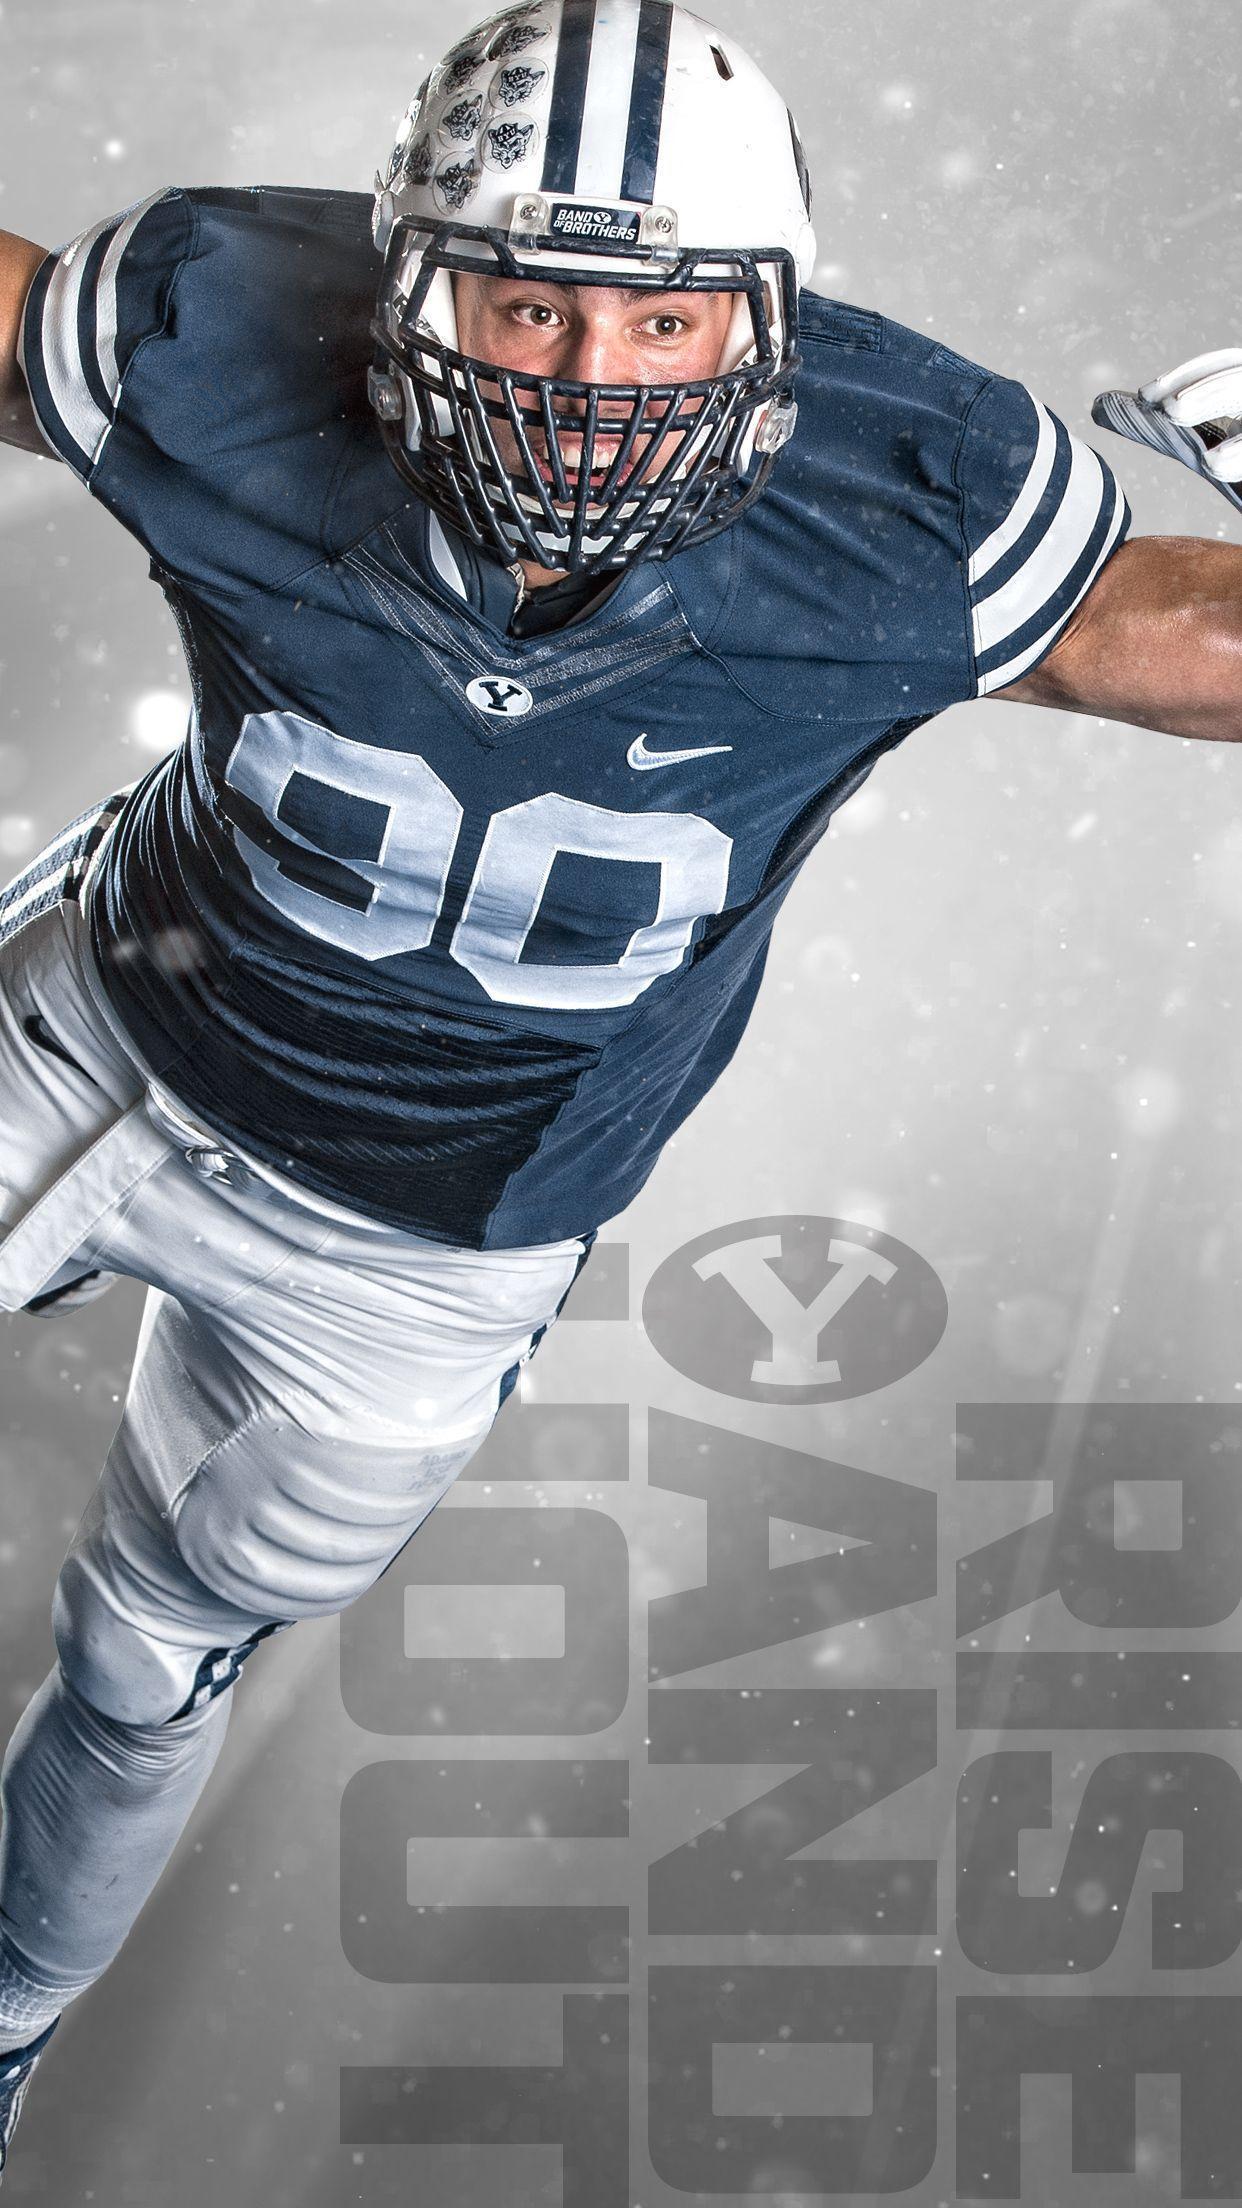 Most Recent BYU Wallpaper. BYU Sports Camps